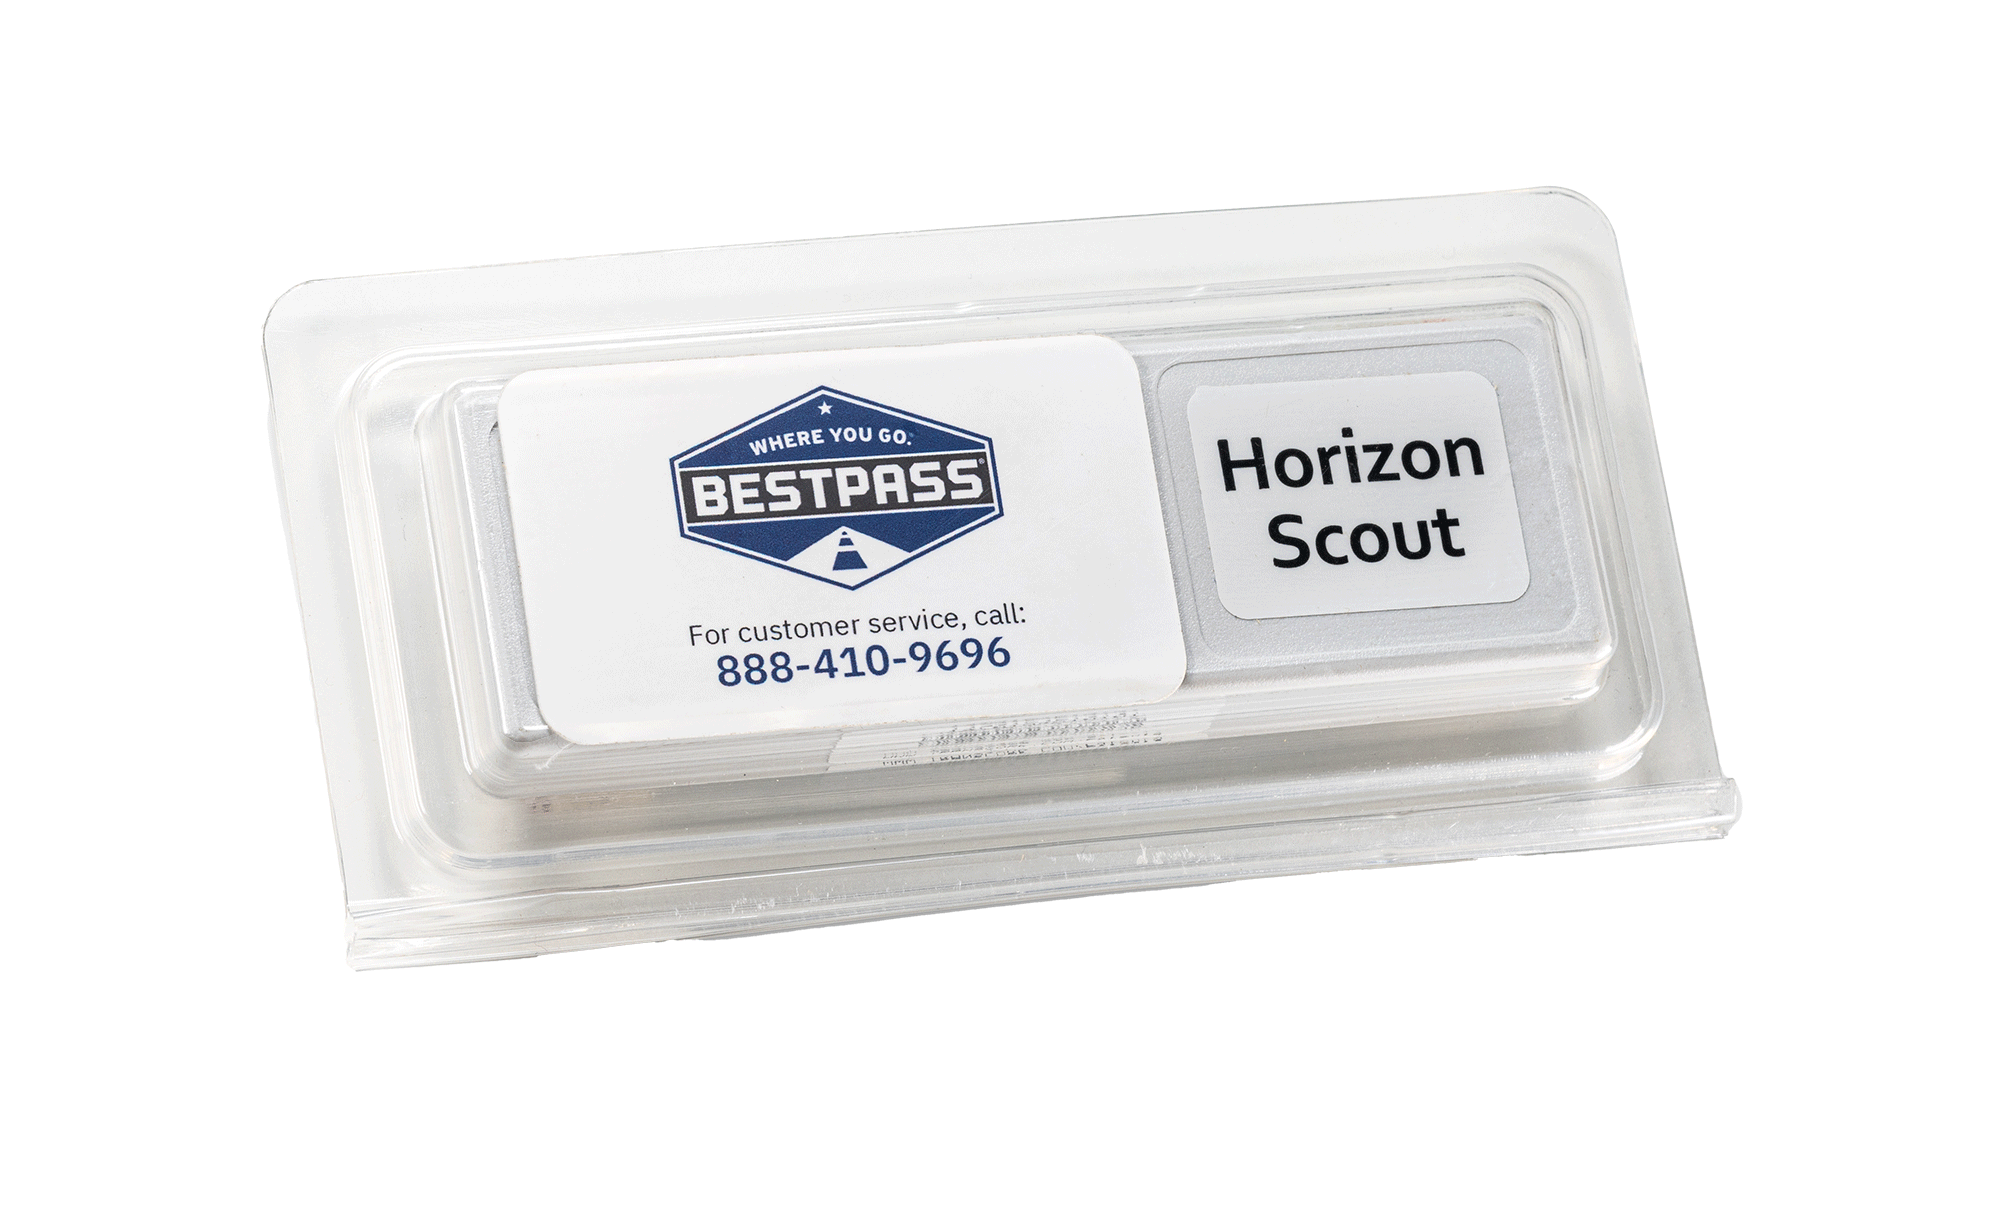 Bestpass’s Horizon Scout toll transponder mounted on a truck windshield 